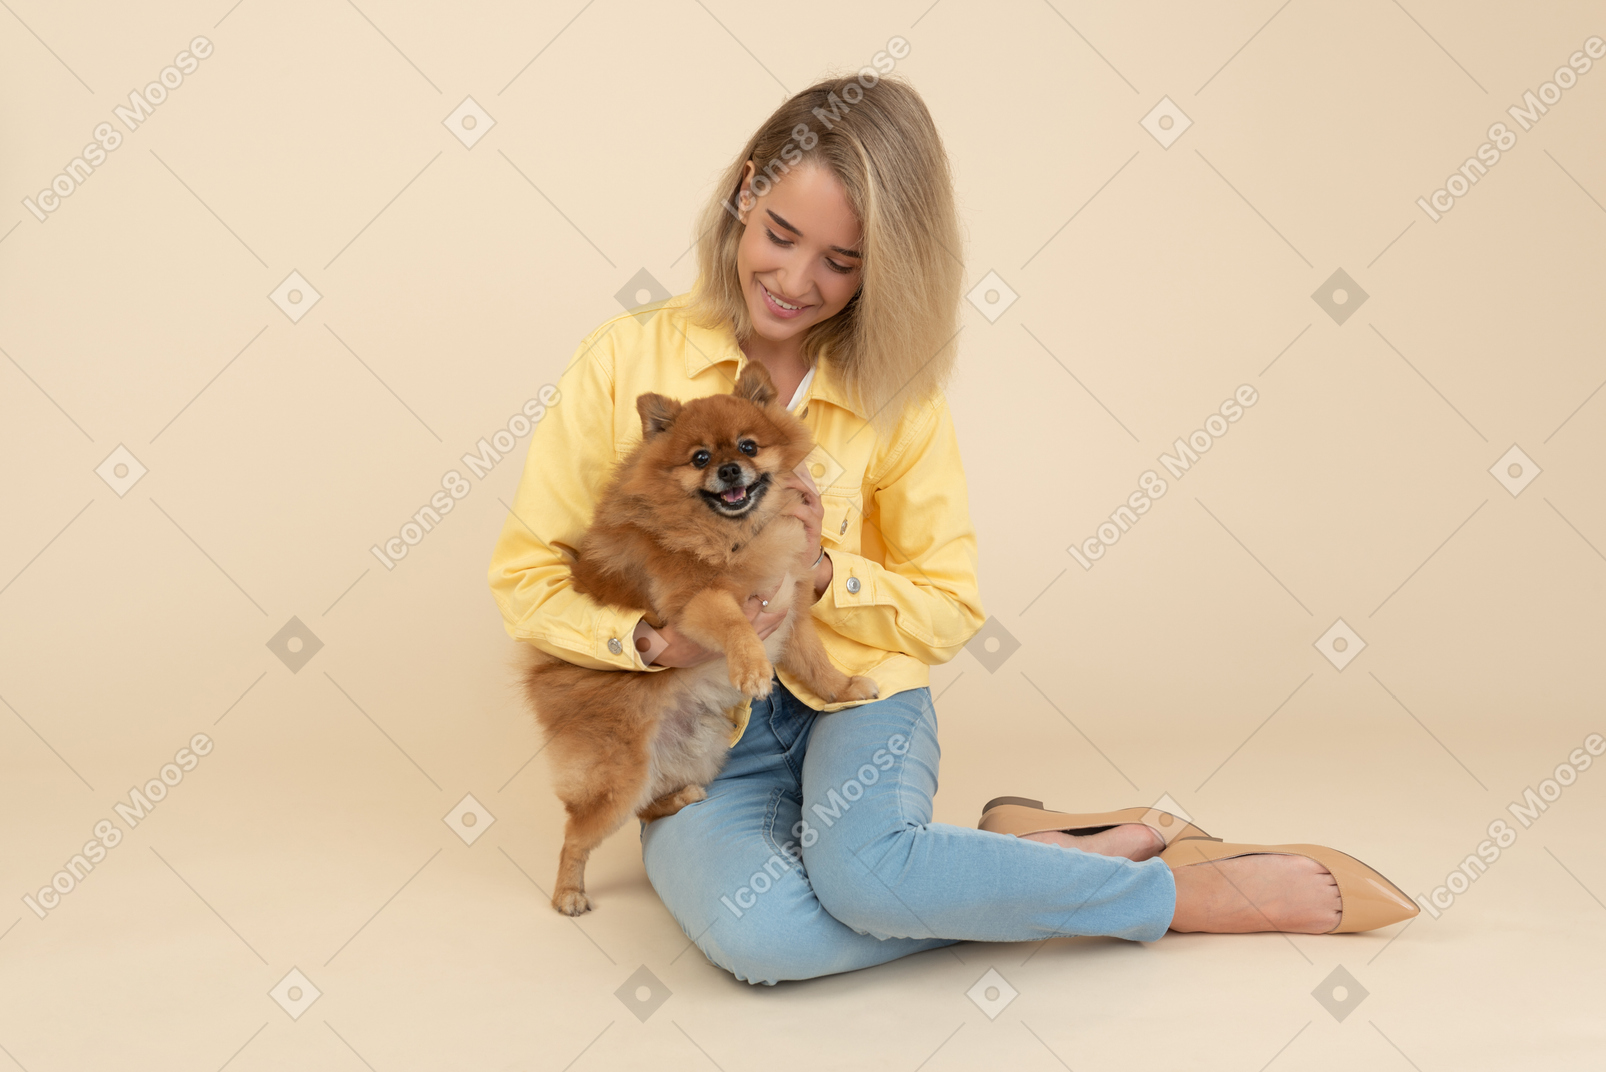 Young girl sitting and holding a spitz dog